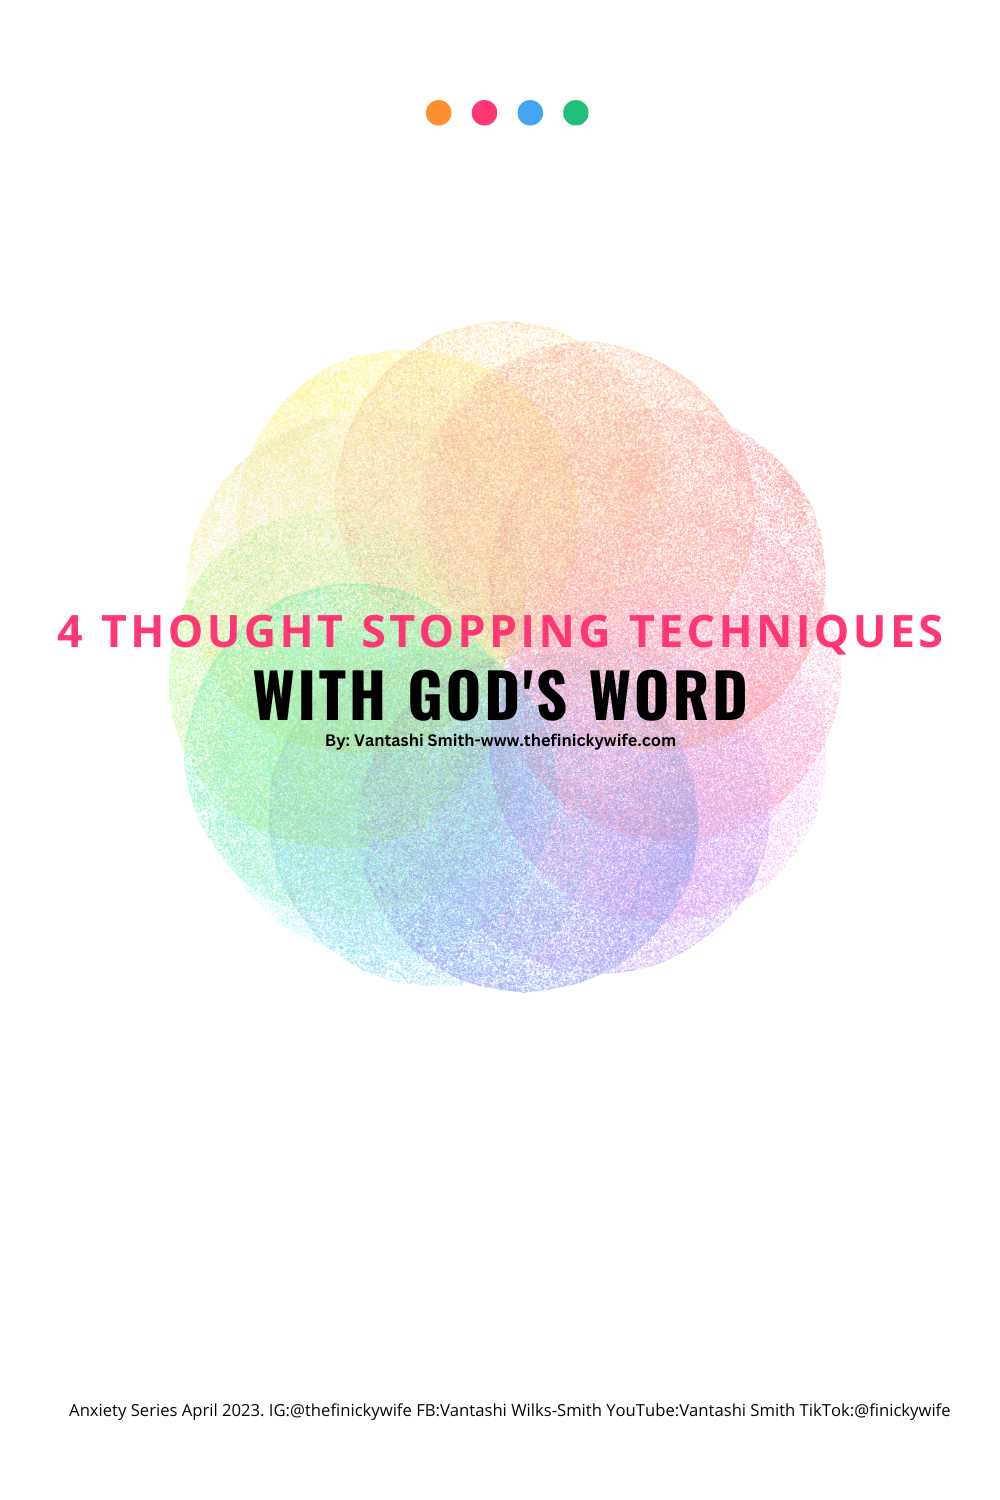 FREE Download-Anxiety: 4 Thought Stopping Techniques to stop anxiety with God's Word!